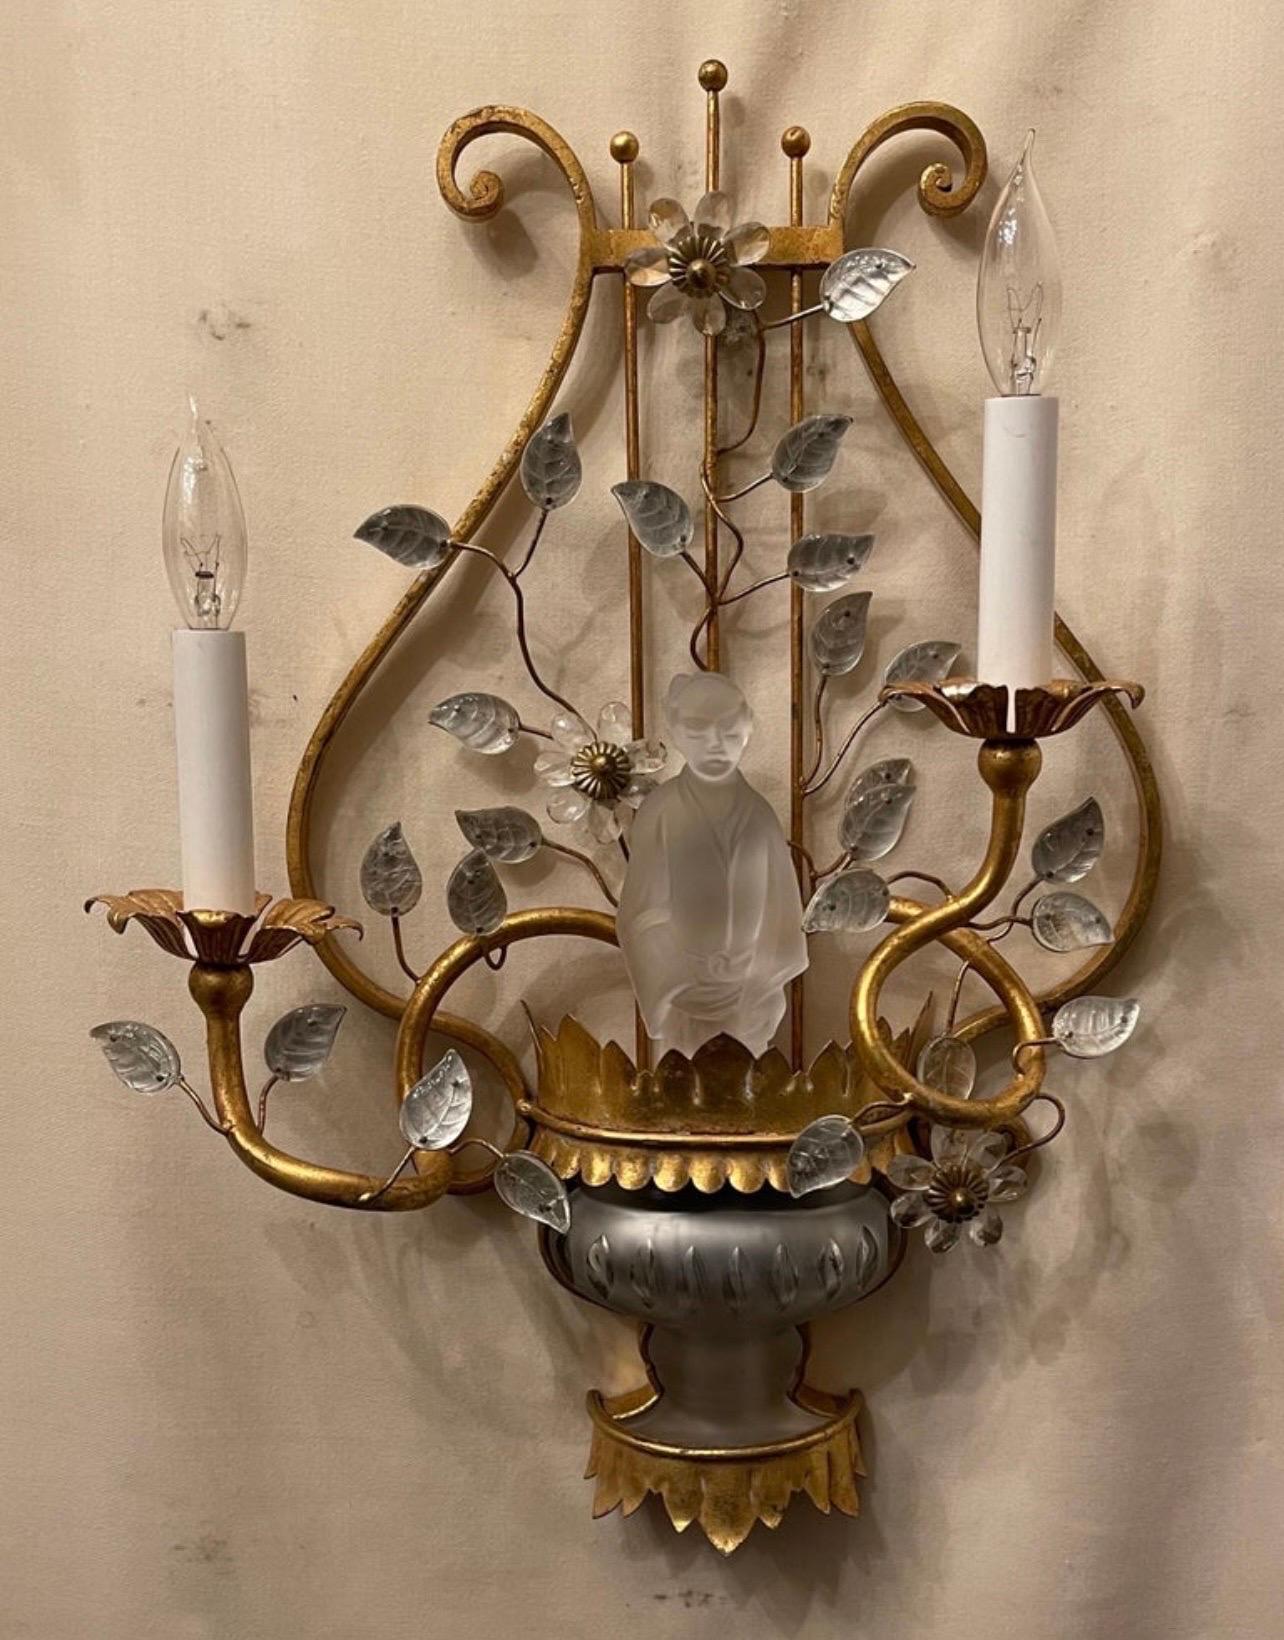 Wonderful Pair Of Maison Bagues / Sherle Wagner Style / Manner Chinoiserie Gold Gilt Harp Back Two Candelabra Light Wall Sconces With Crystal Leaves And Removable Frosted Crystal Chinoiserie Figurines. 
Purchased In France, Wiring Is Up To Date And